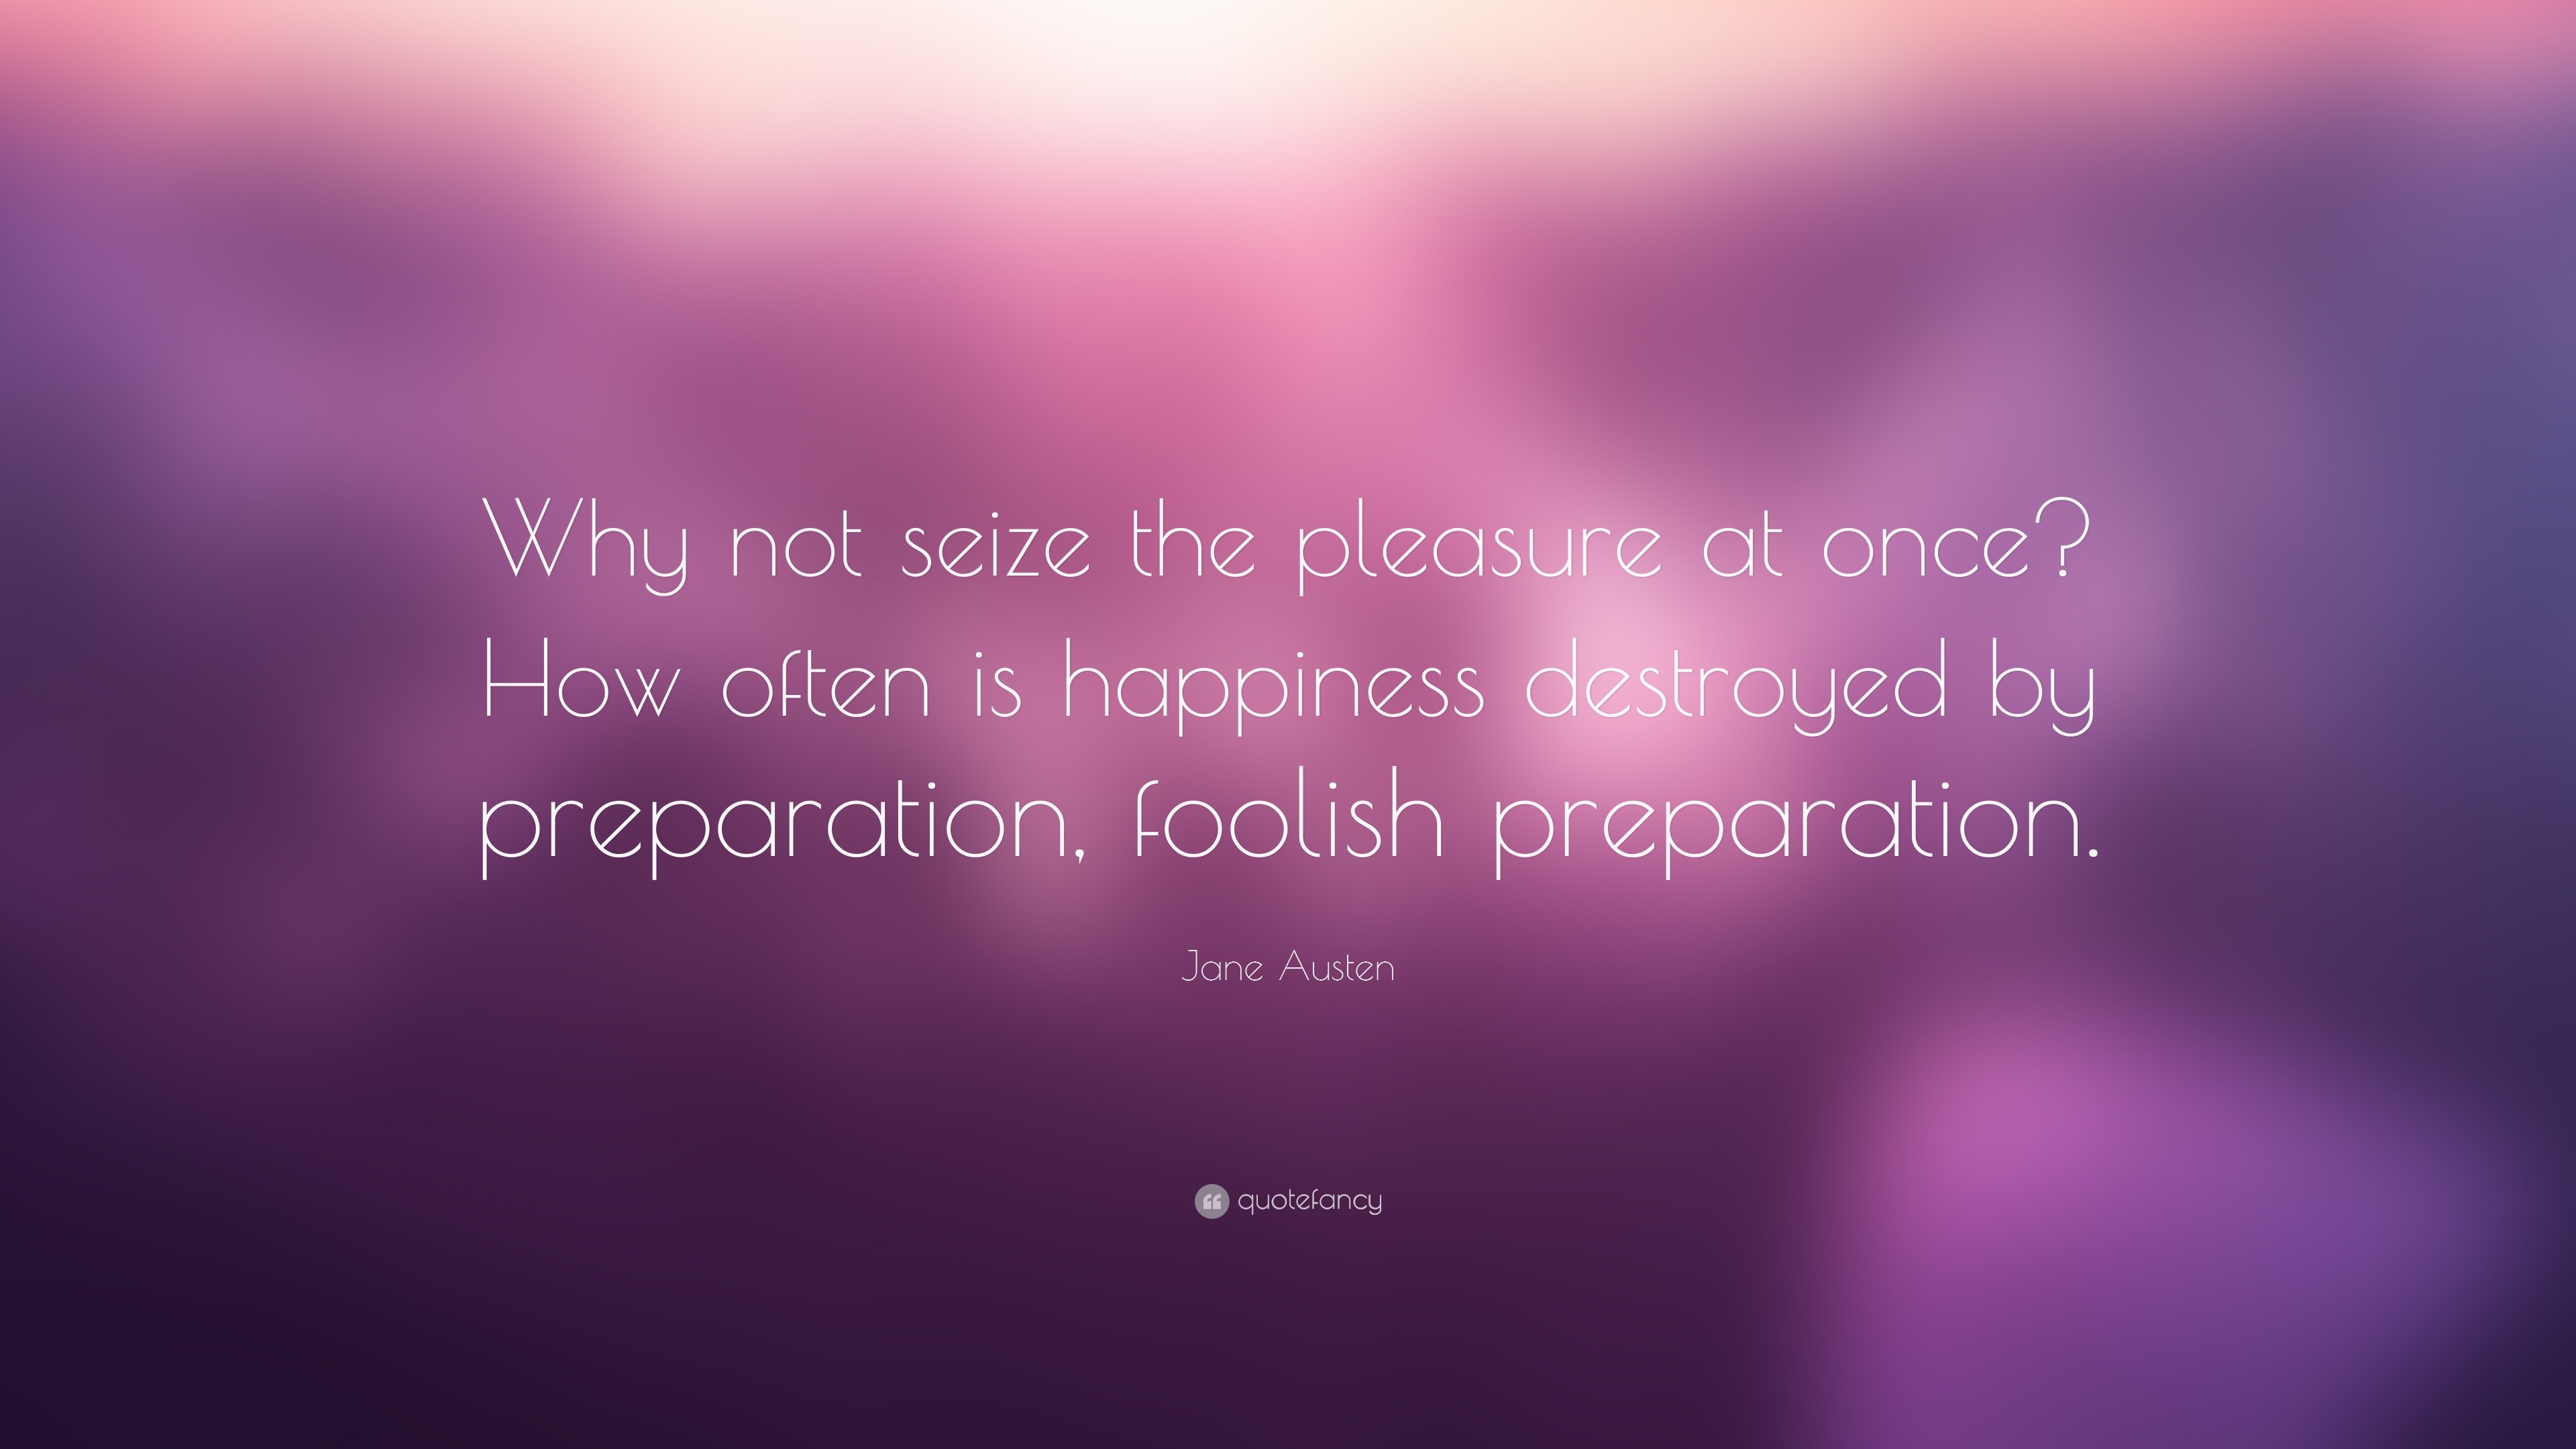 Jane Austen Quote: "Why not seize the pleasure at once? How often is happiness destroyed by ...